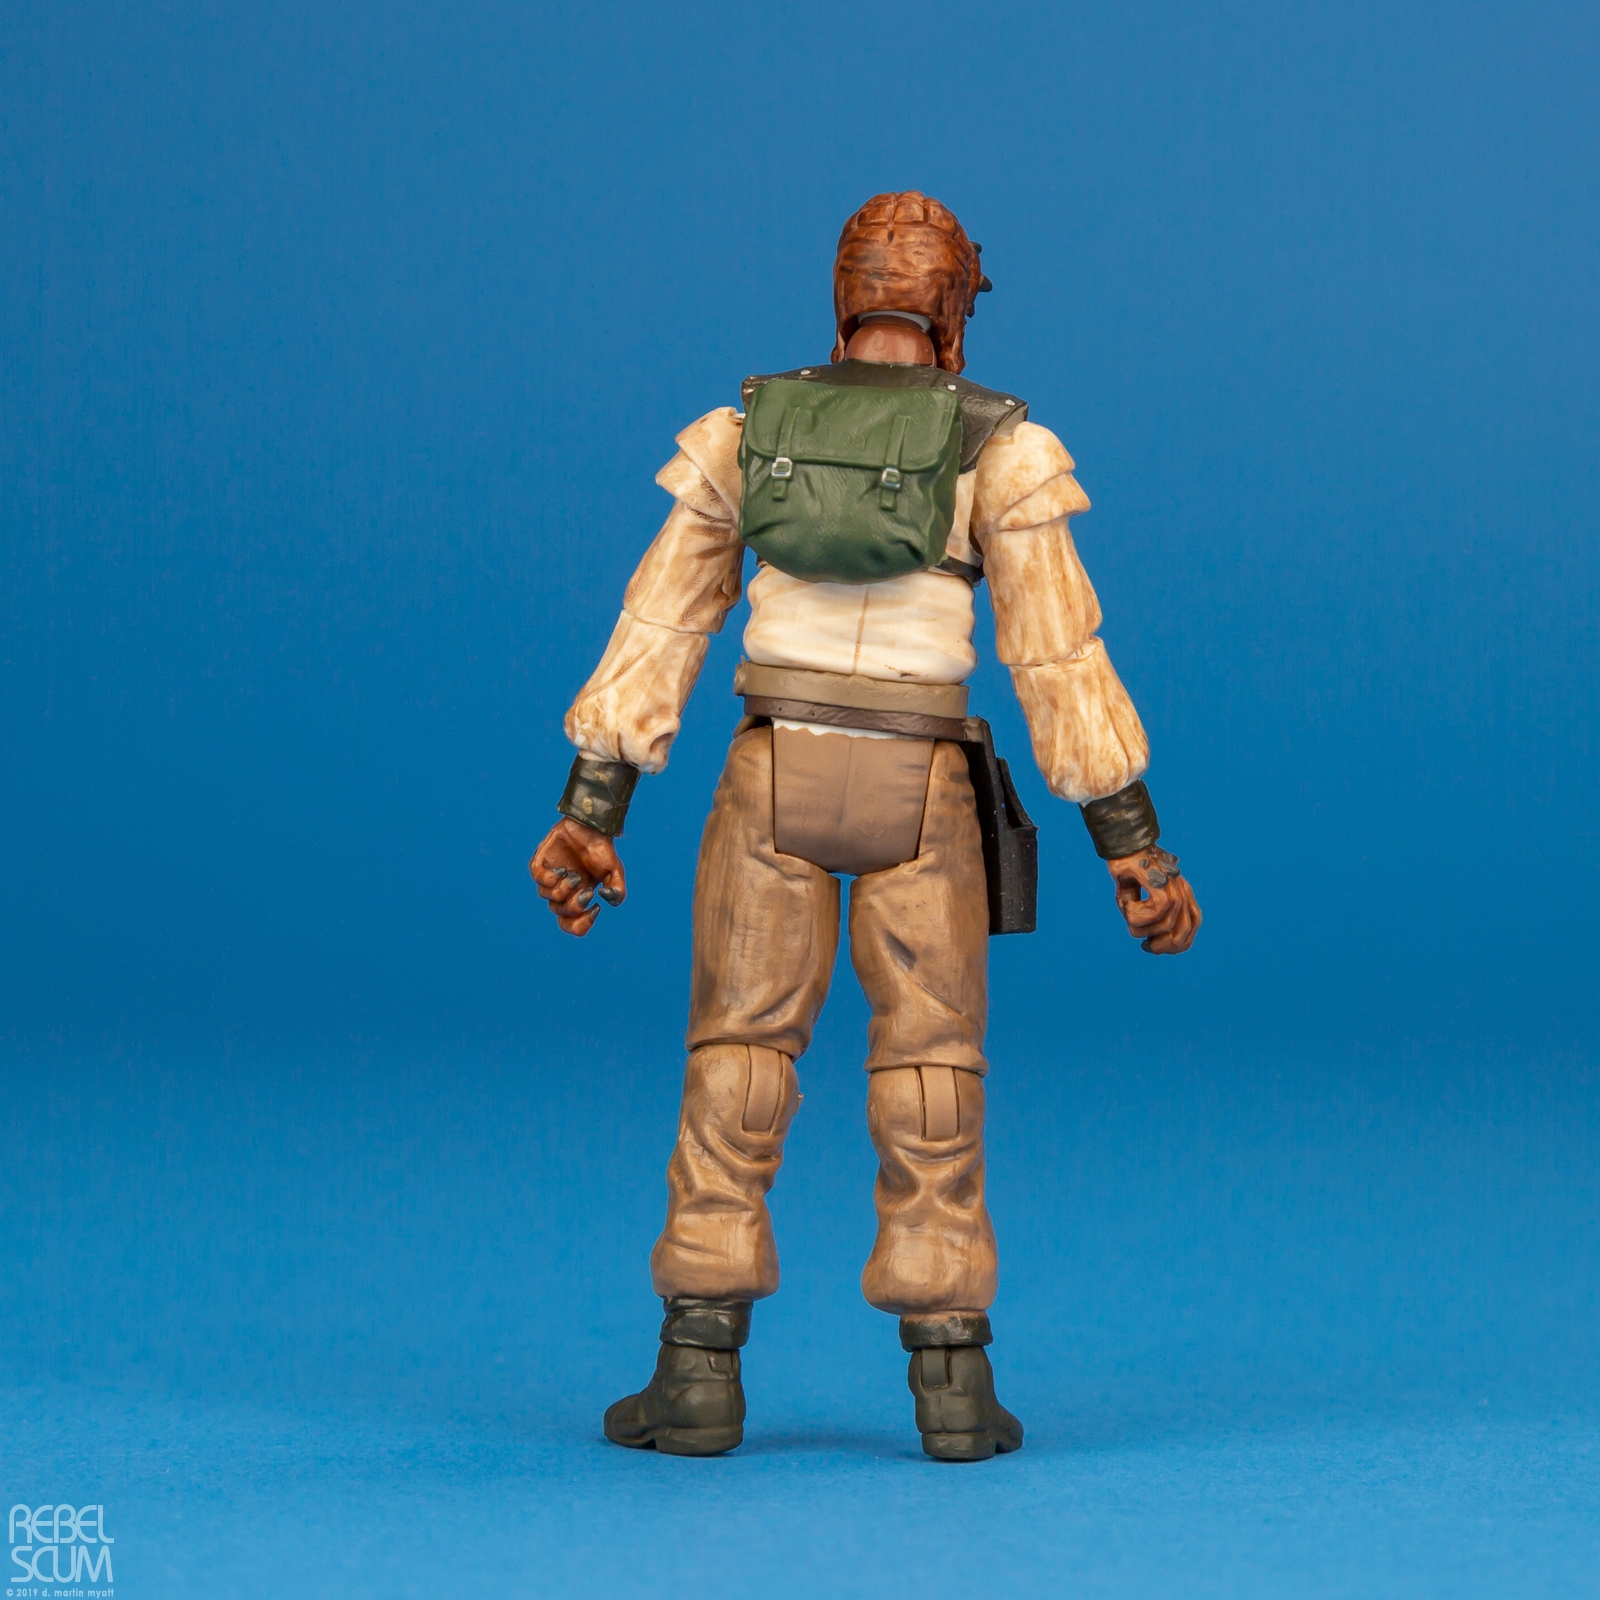 Special-3-Action-Figures-Set-The-Vintage-Collection-004.jpg